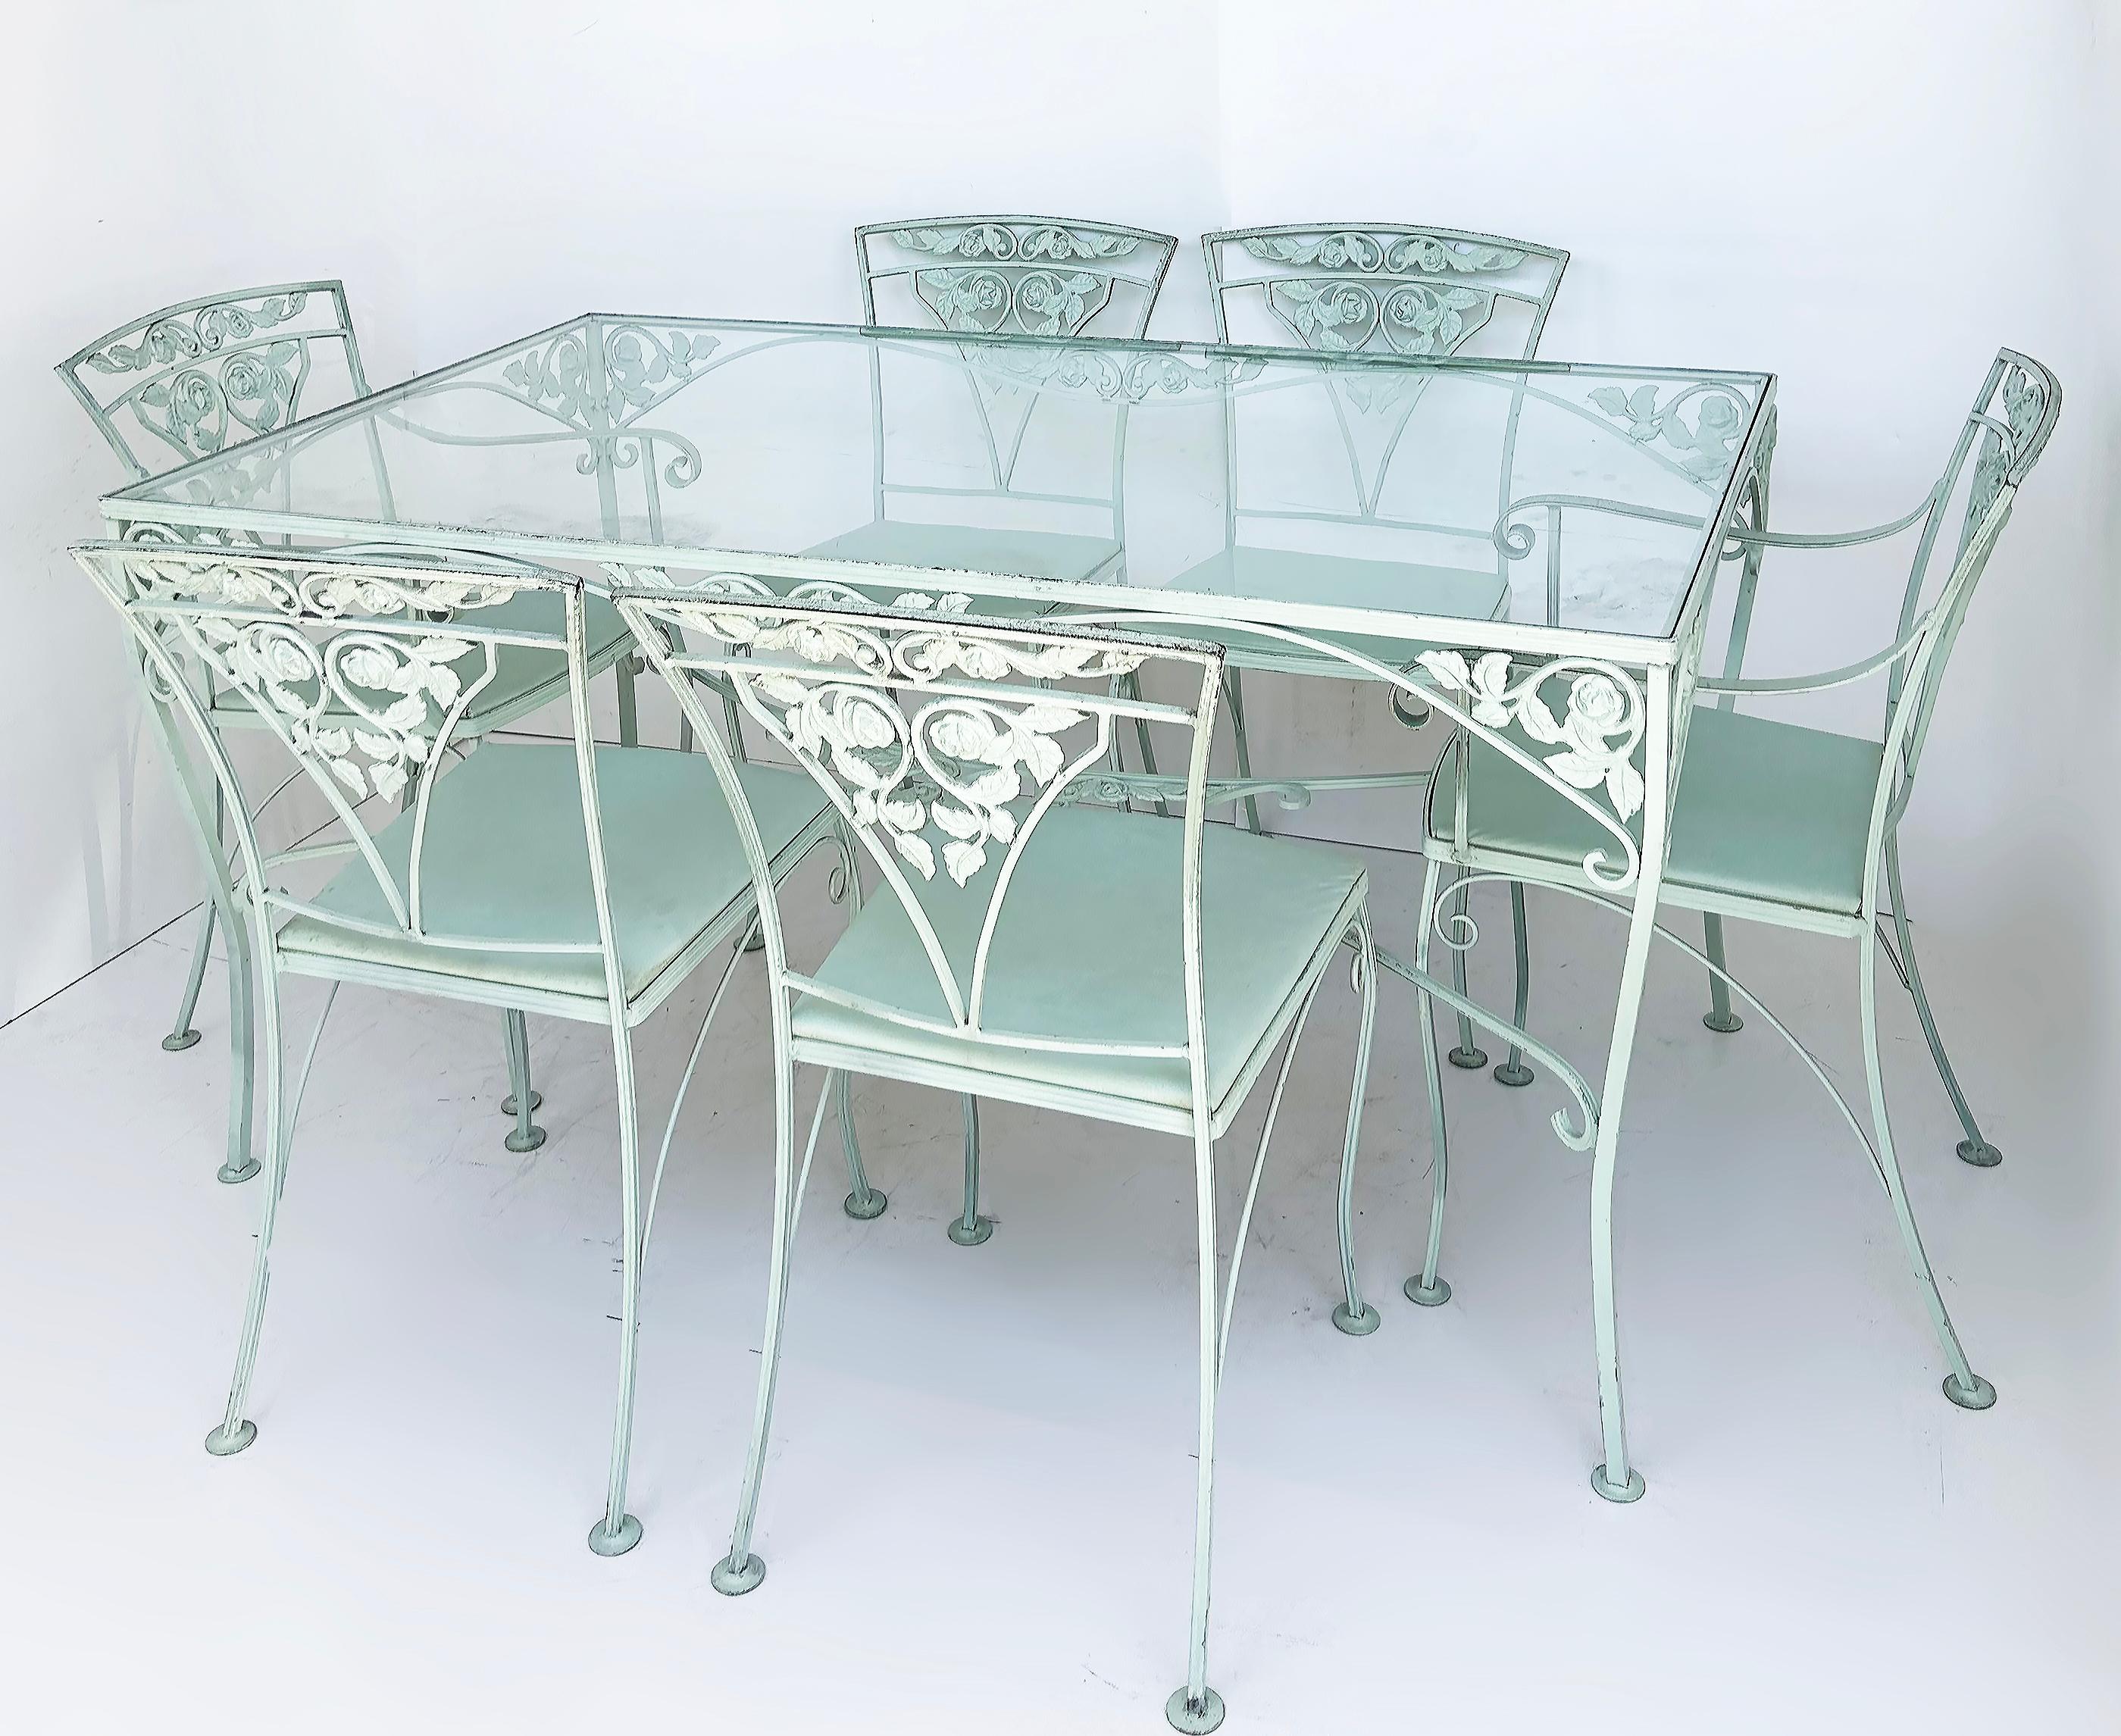 Wrought Iron Dining Table Set of 6 Chairs, Russell Woodard attributed

Offered for sale is a mid-century modern wrought iron 7-piece set with a dining table and chairs attributed to Russell Woodard. The chairs each have their upholstered seats. 